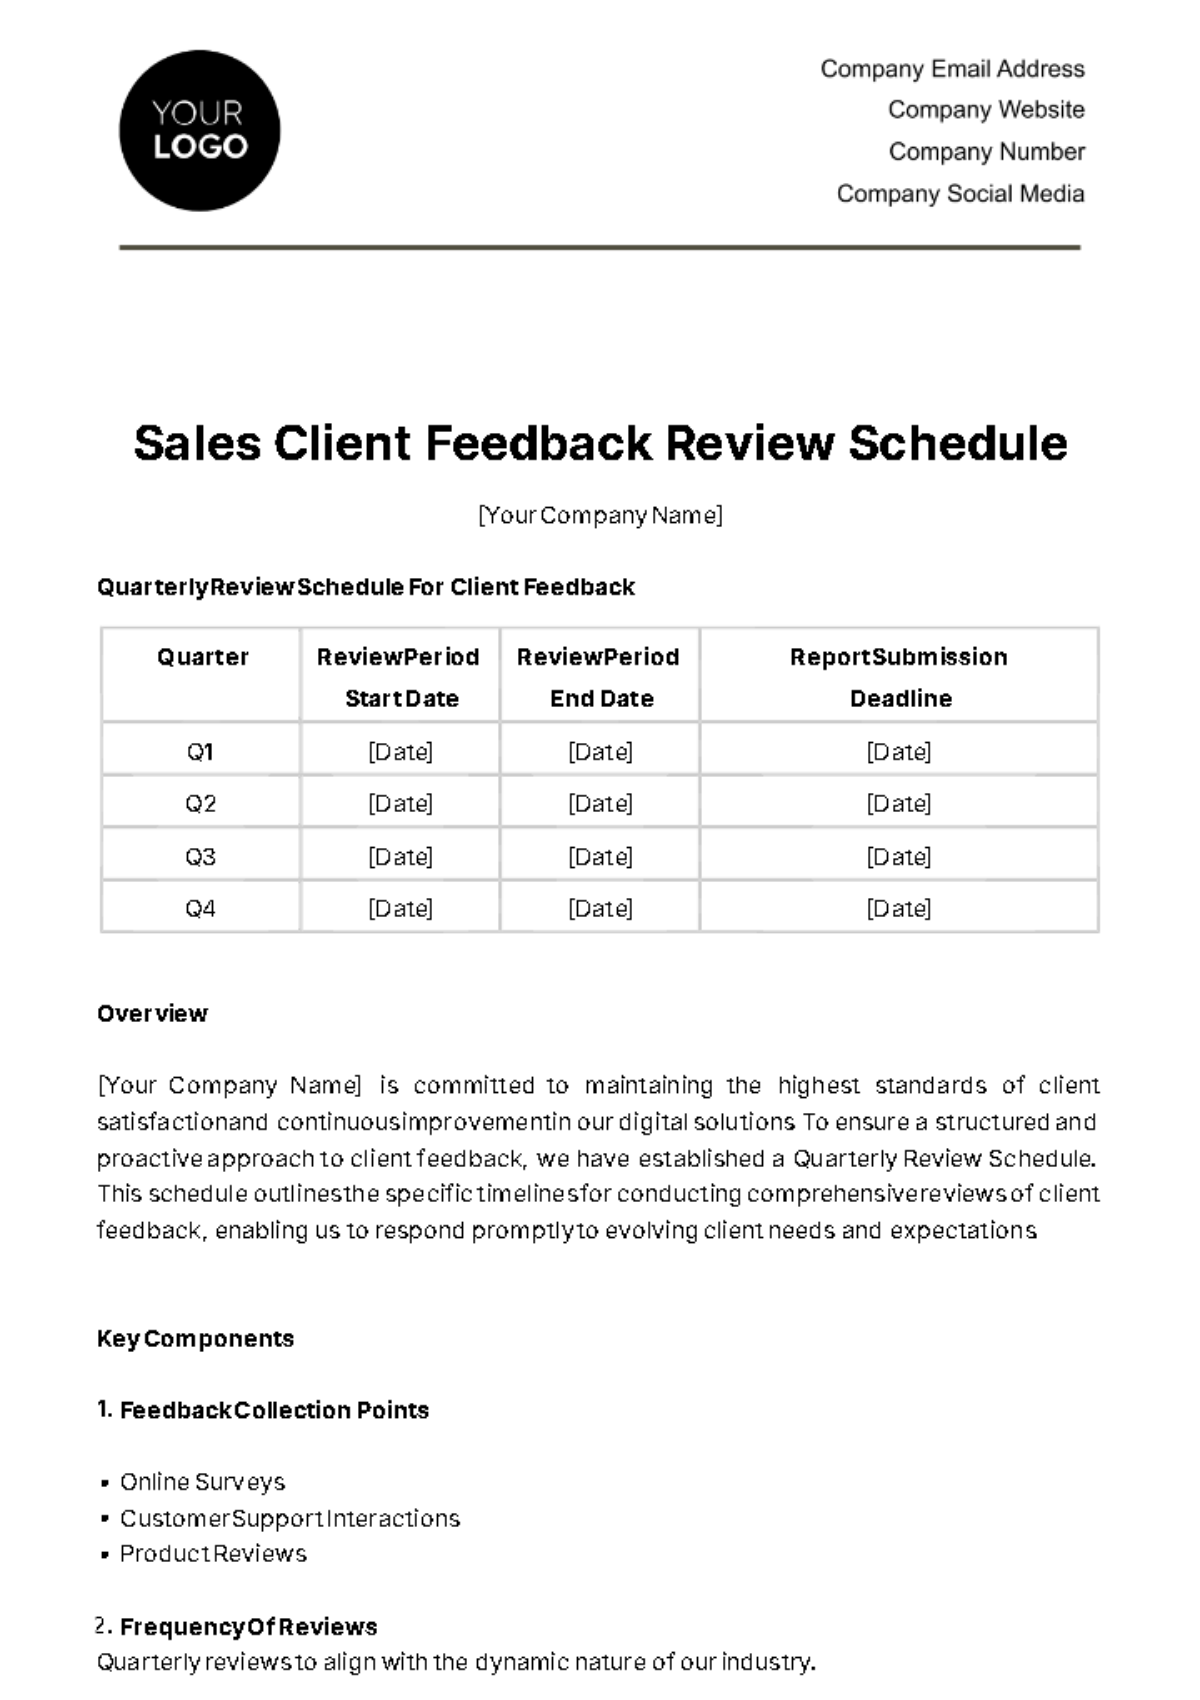 Sales Client Feedback Review Schedule Template